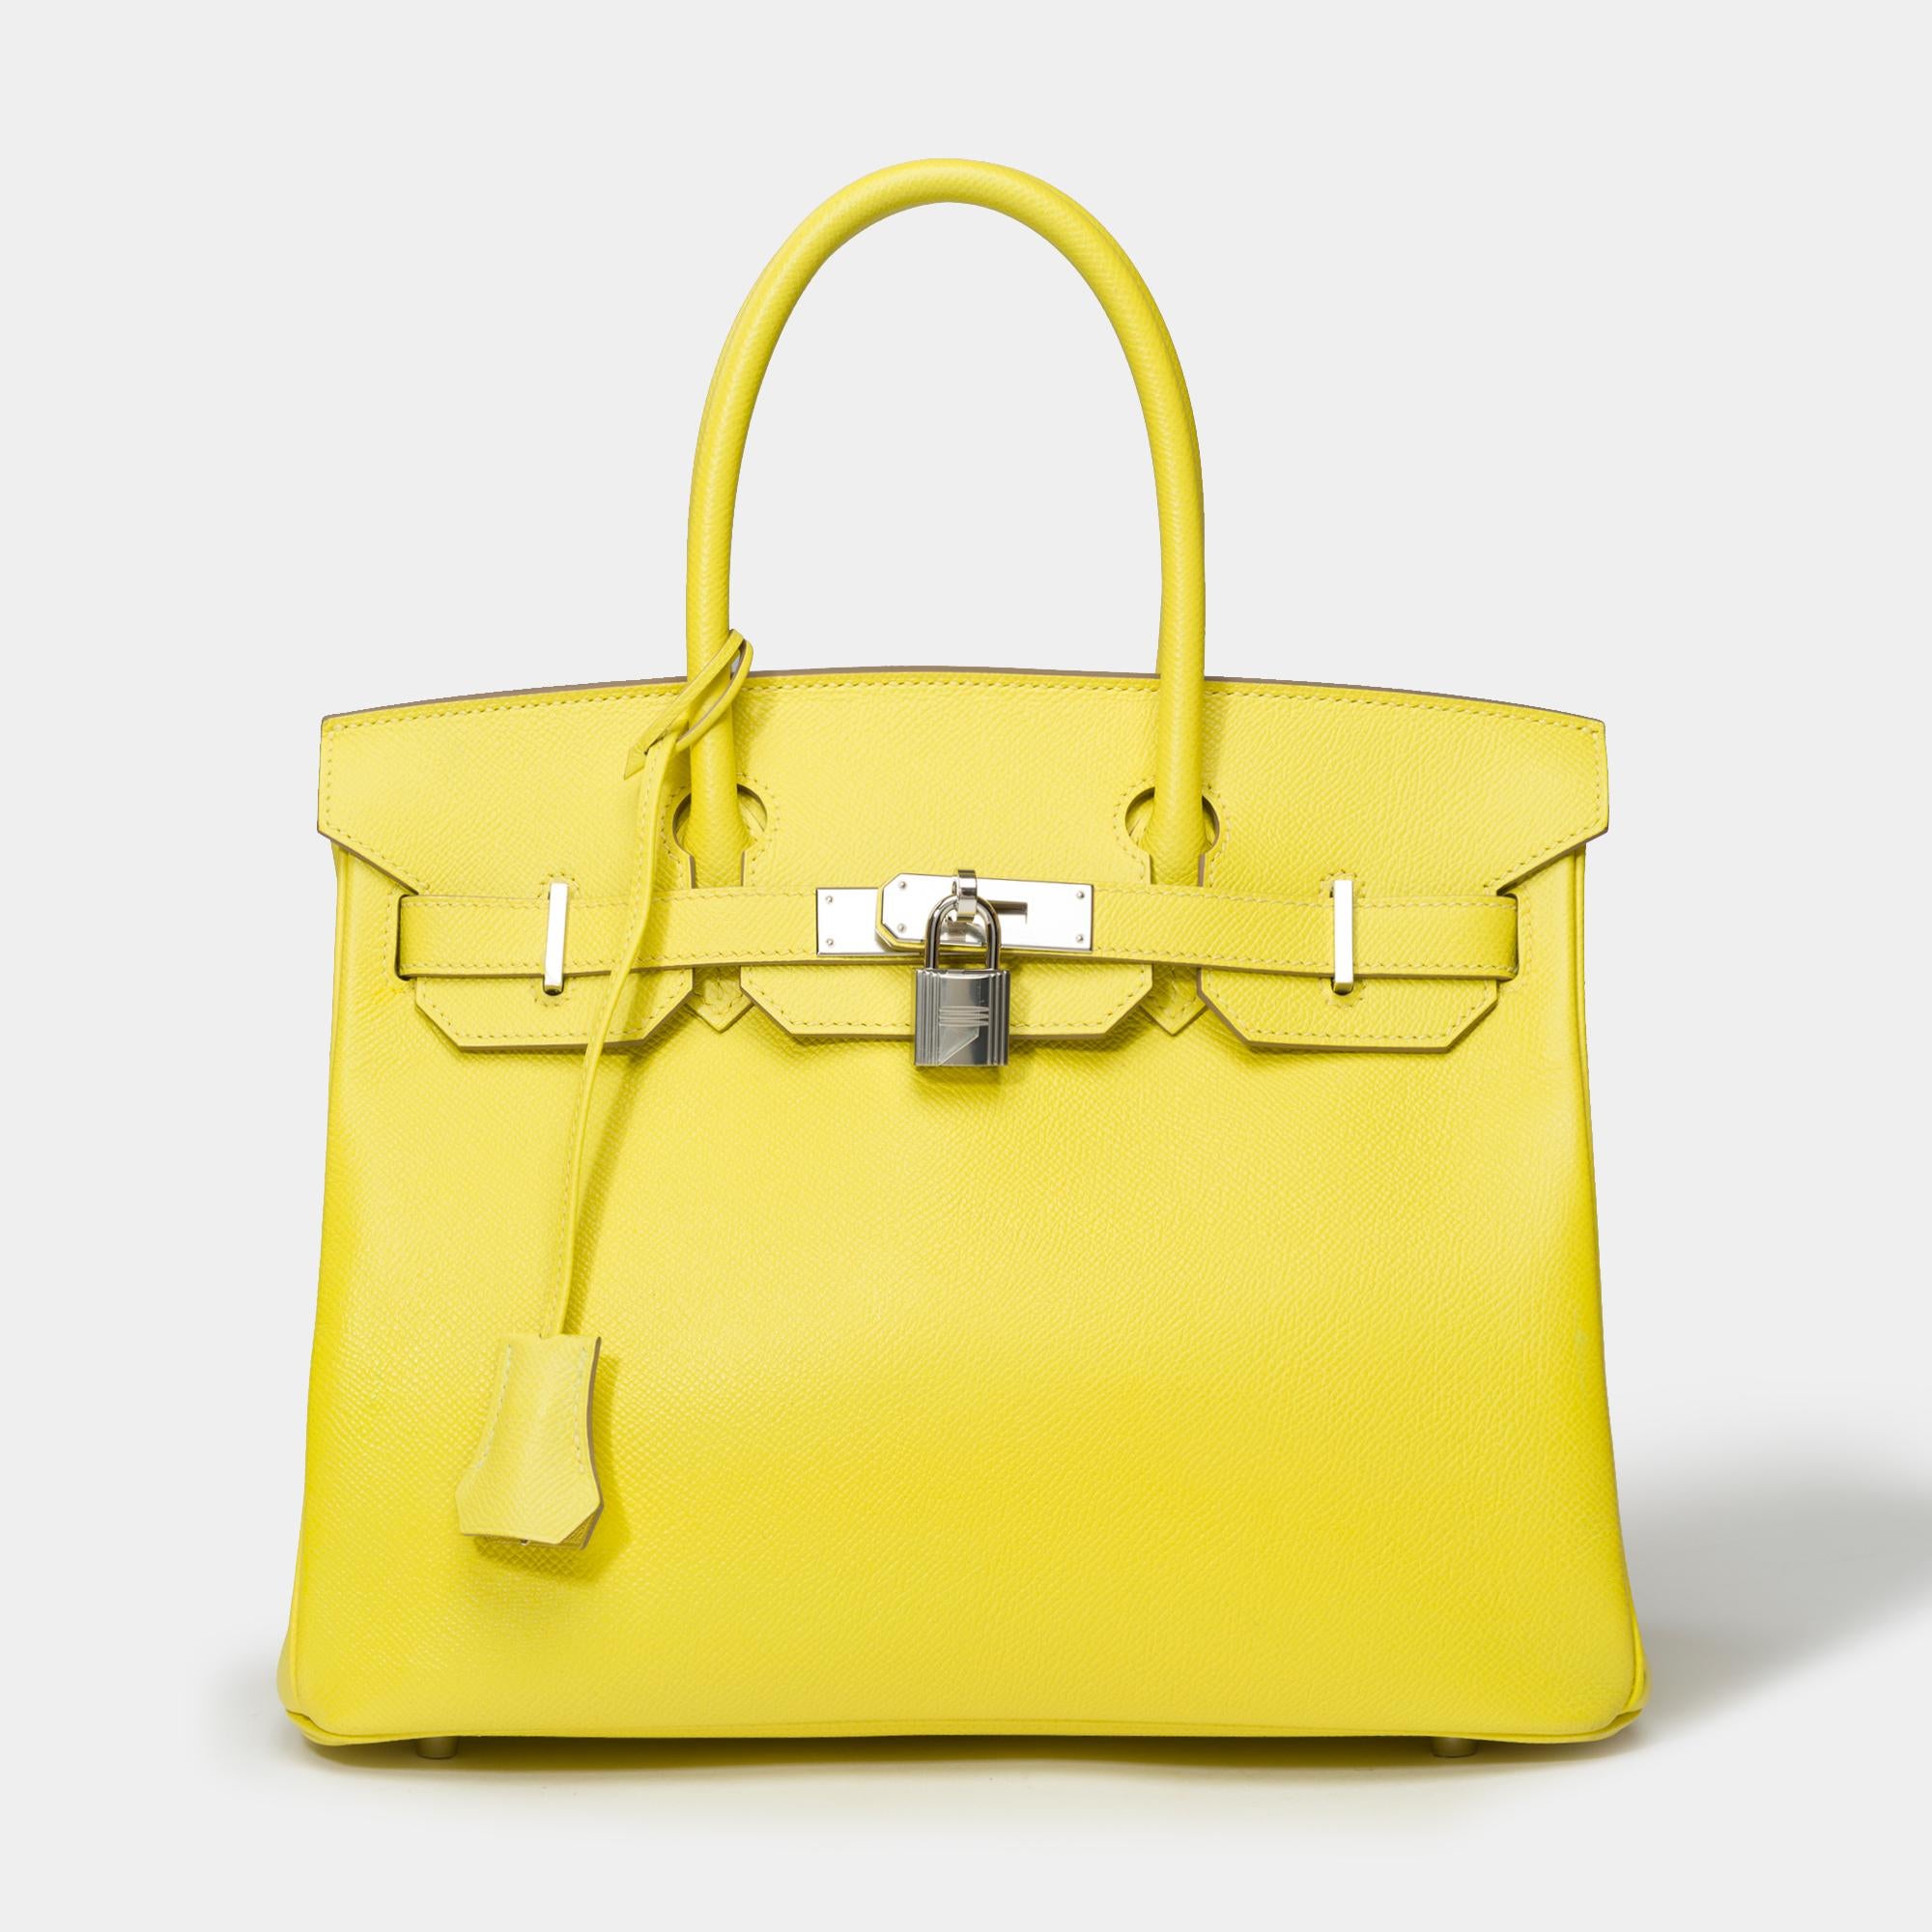 Splendid​​ ​​Hermes​​ ​​Birkin​​ ​​30​​ ​​handbag​​ ​​in​​ ​Lime​​ ​​Epsom​​ ​​leather,​​ ​palladium​ ​silver​ ​metal​ ​​trim​​ ​​,​​ ​​double​​ ​​handle​​ ​​in​​ ​​yellow​​ ​​leather​​ ​​allowing​​ ​​a​​ ​​hand​​ ​​carry

Flap​​ ​​closure
Yellow​​